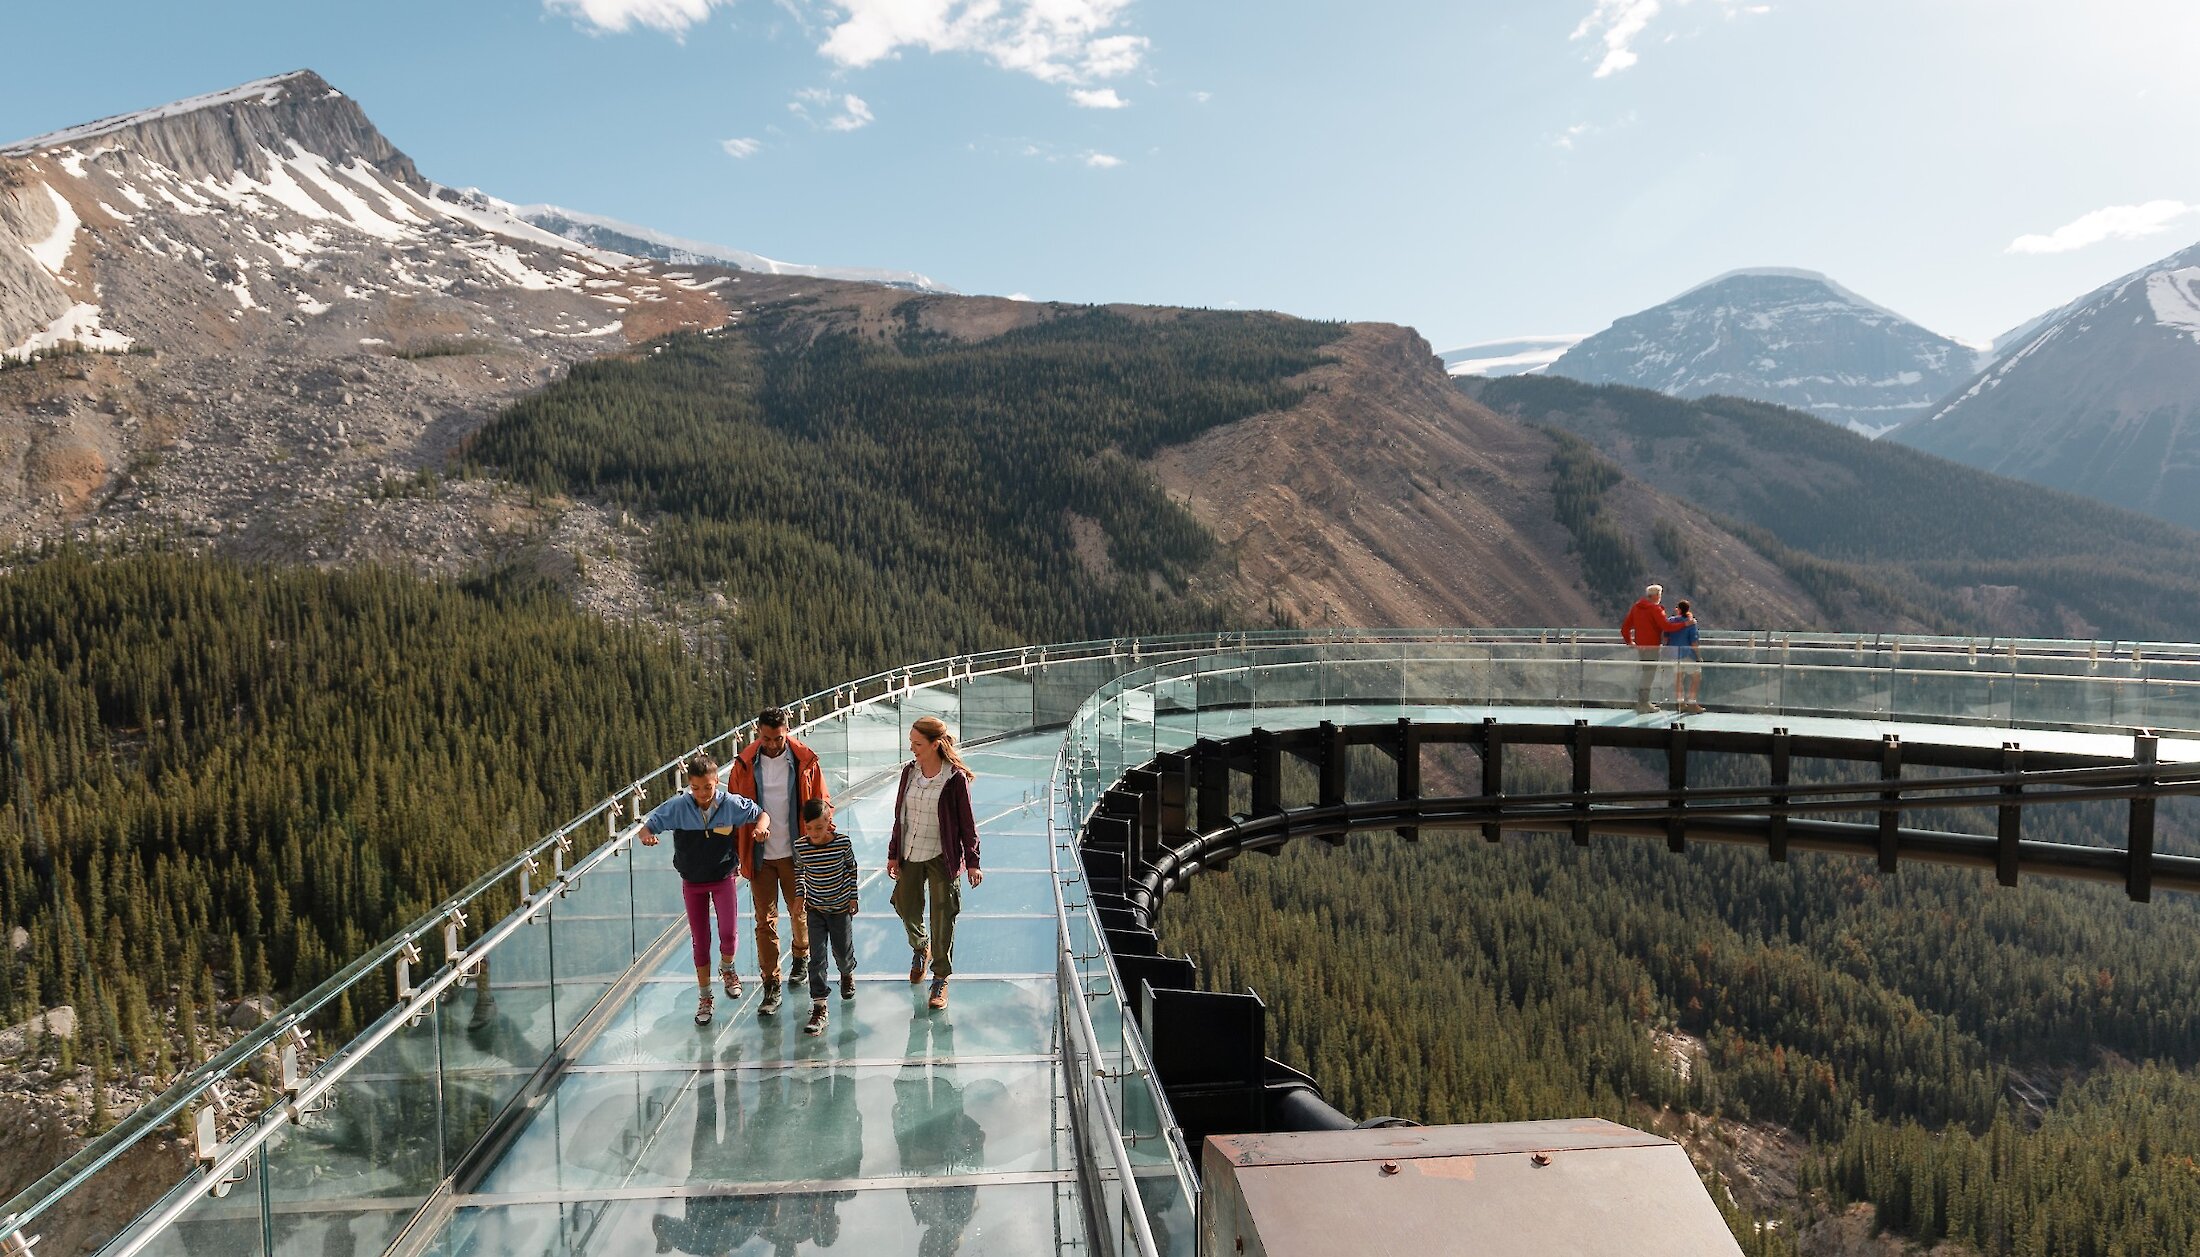 Walking on the Skywalk at the Columbia Icefield